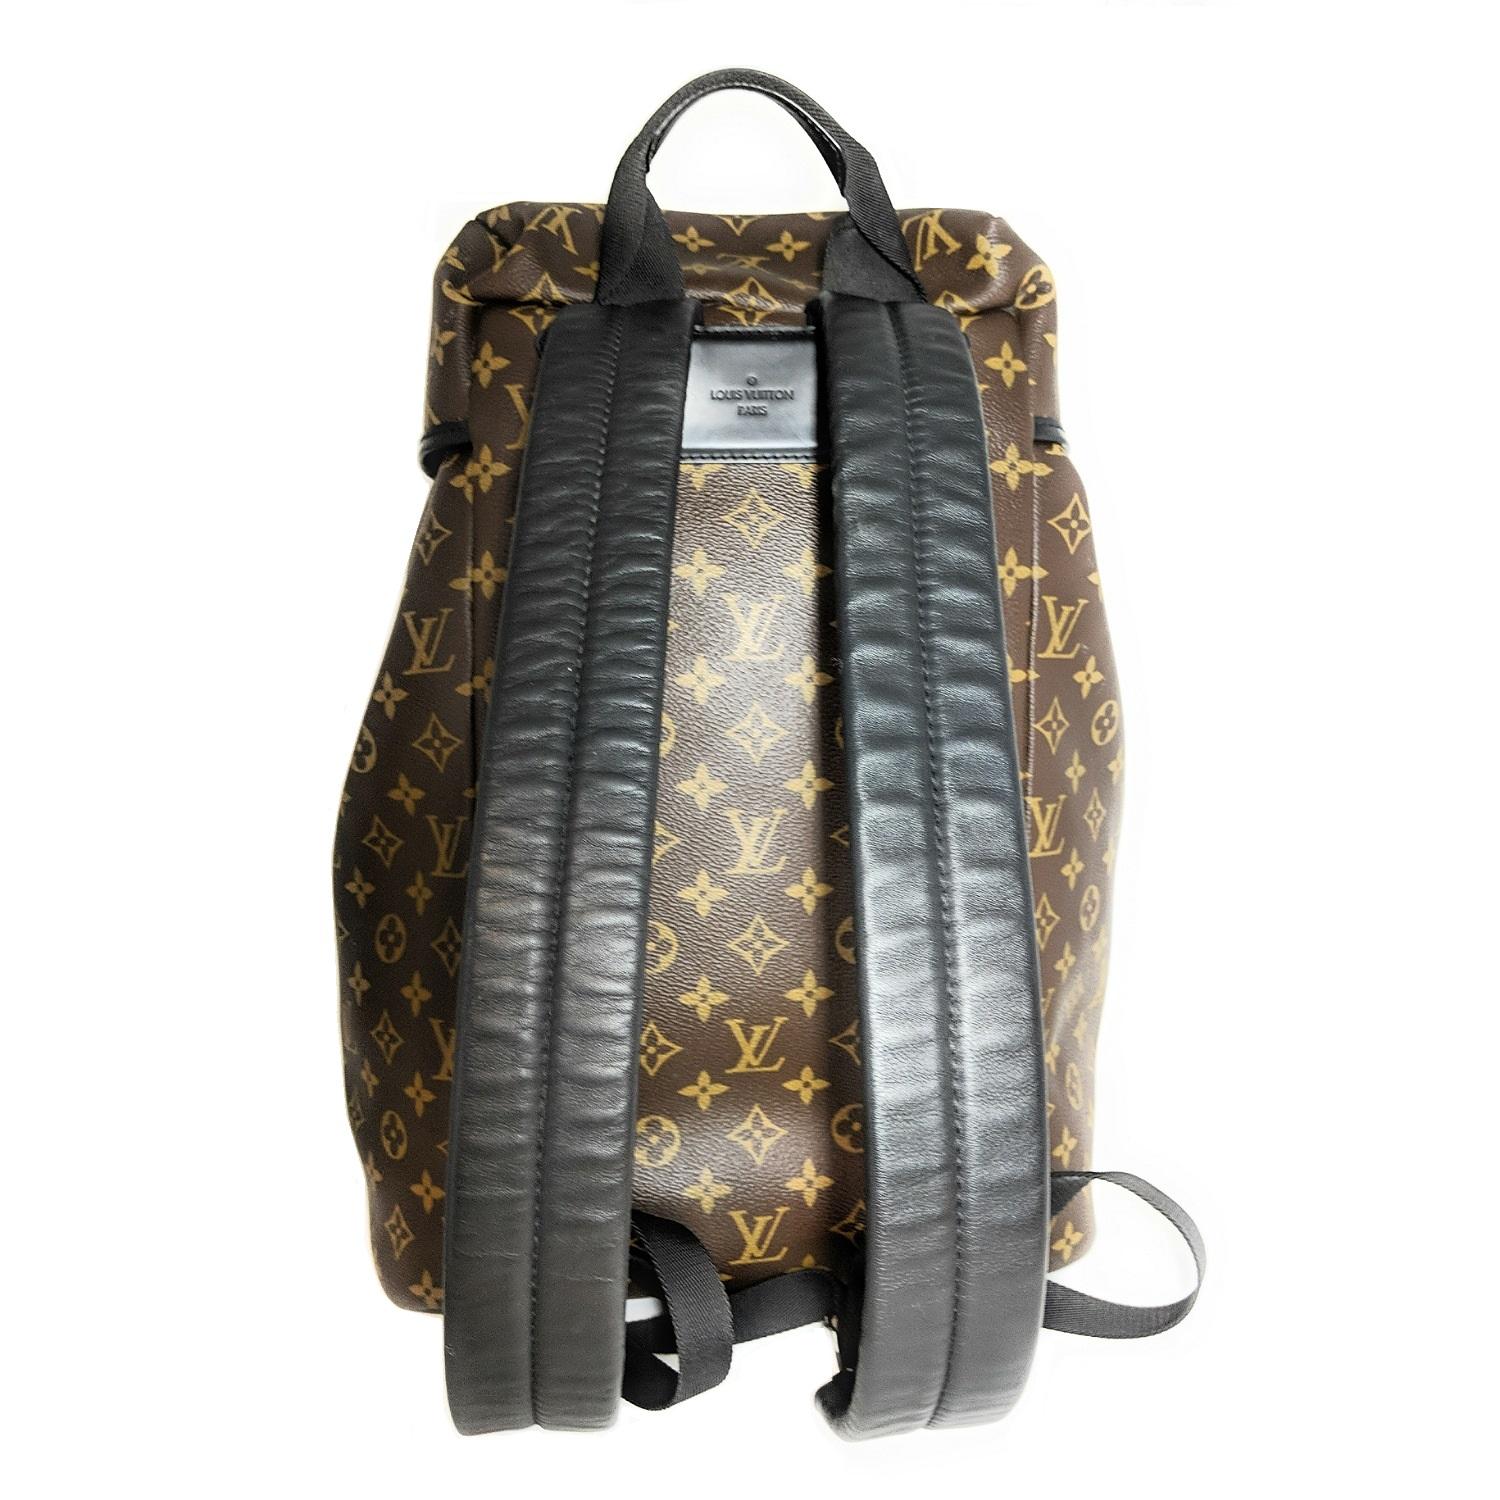 This elegant and sleek Louis Vuitton Monogram Coated Canvas Zack Backpack Bag is perfect for the style conscious man or woman on the go. It features the classic monogram coated canvas for resistance against the elements and one large exterior